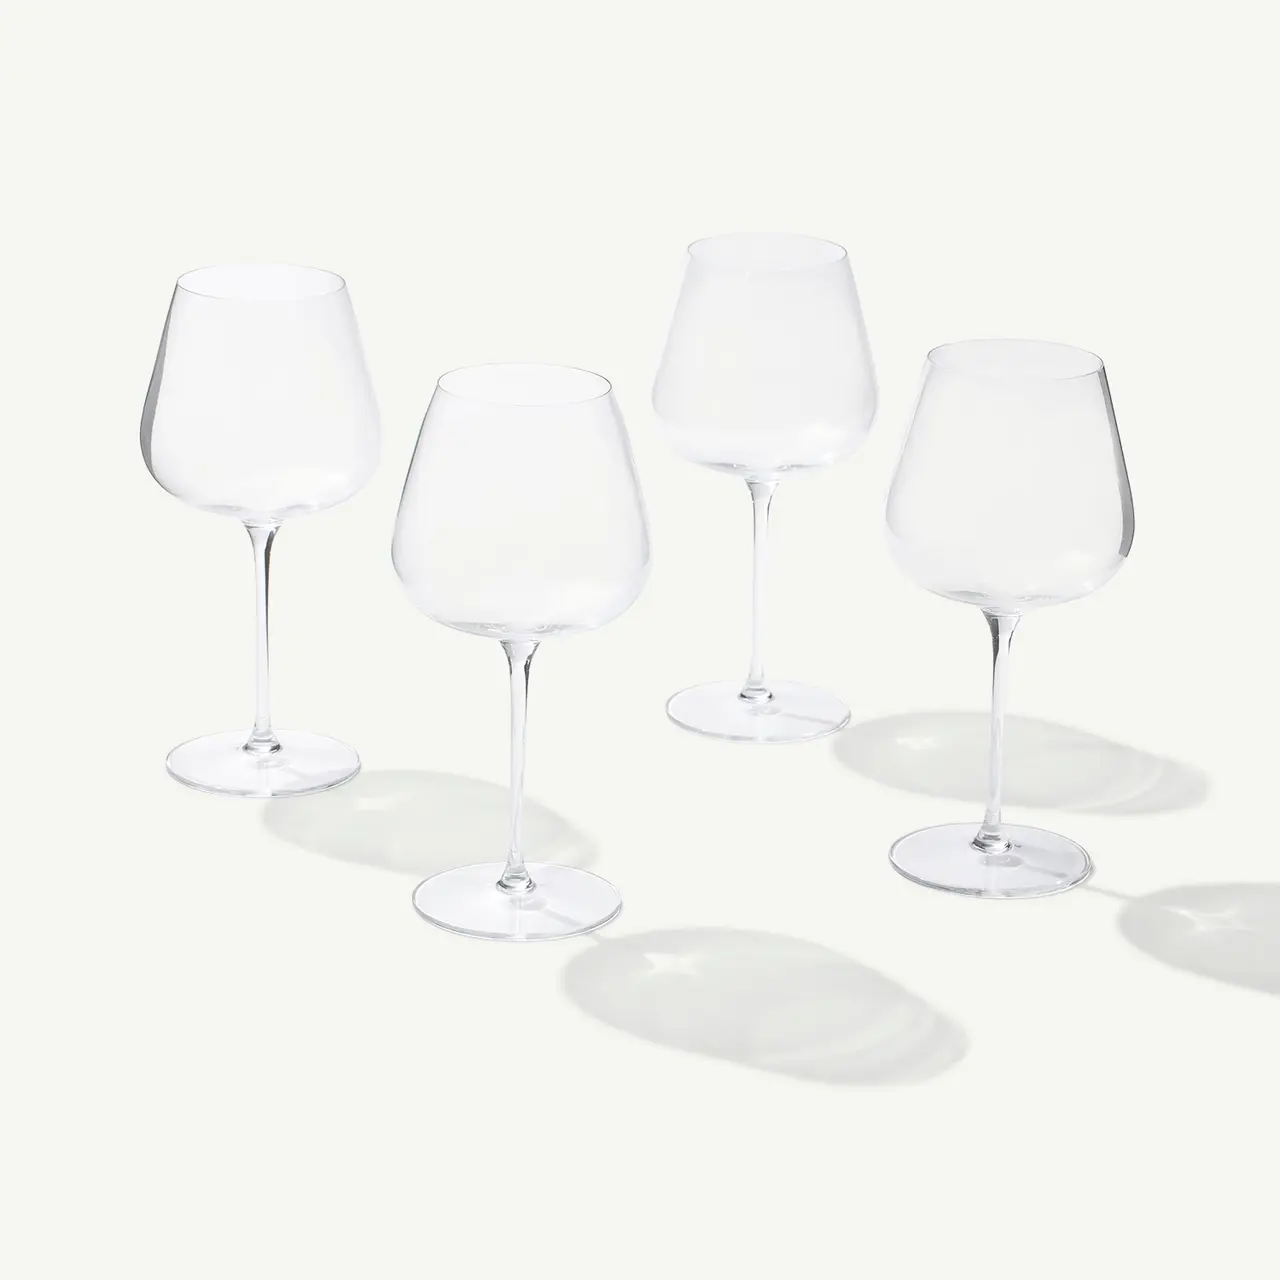 Four empty wine glasses casting soft shadows on a light surface.